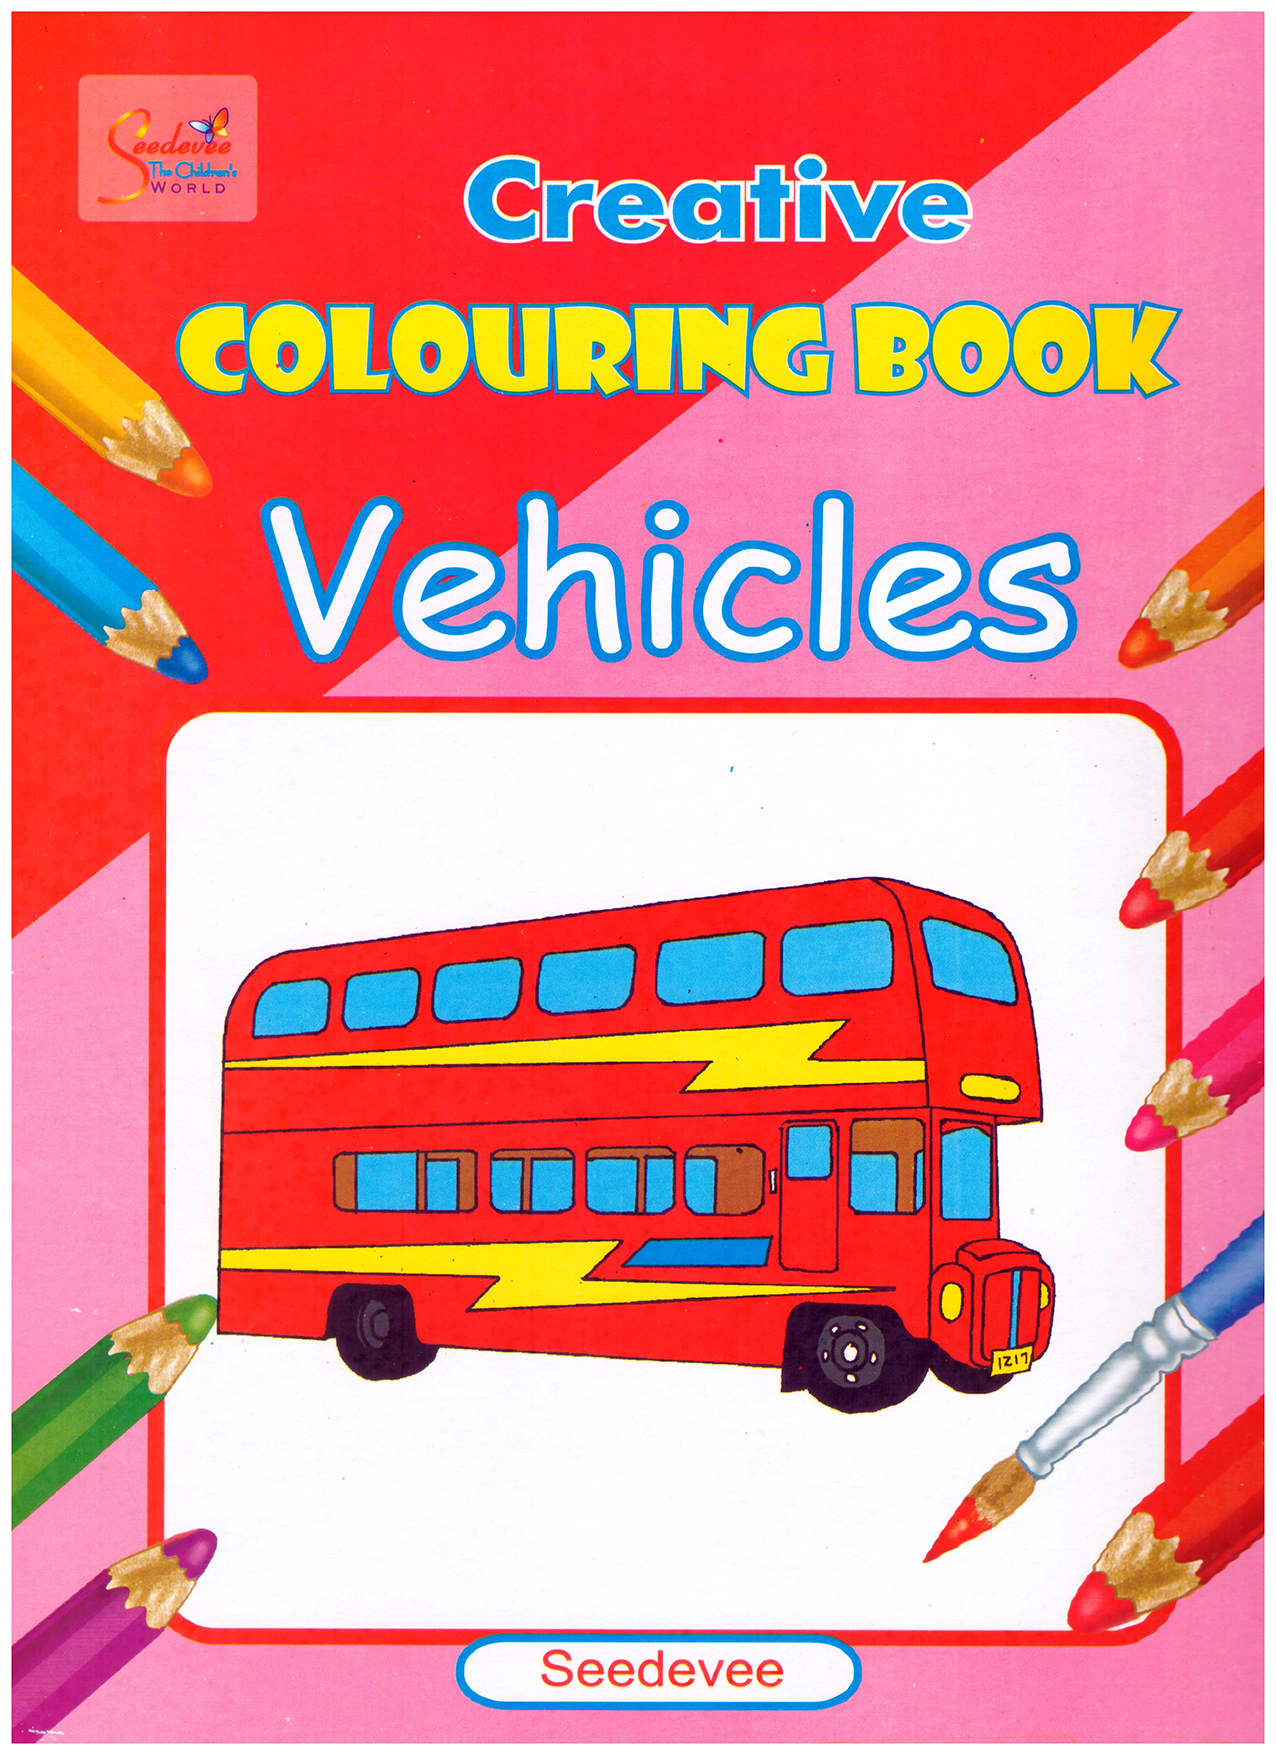 Creative Colouring Book Vehicles